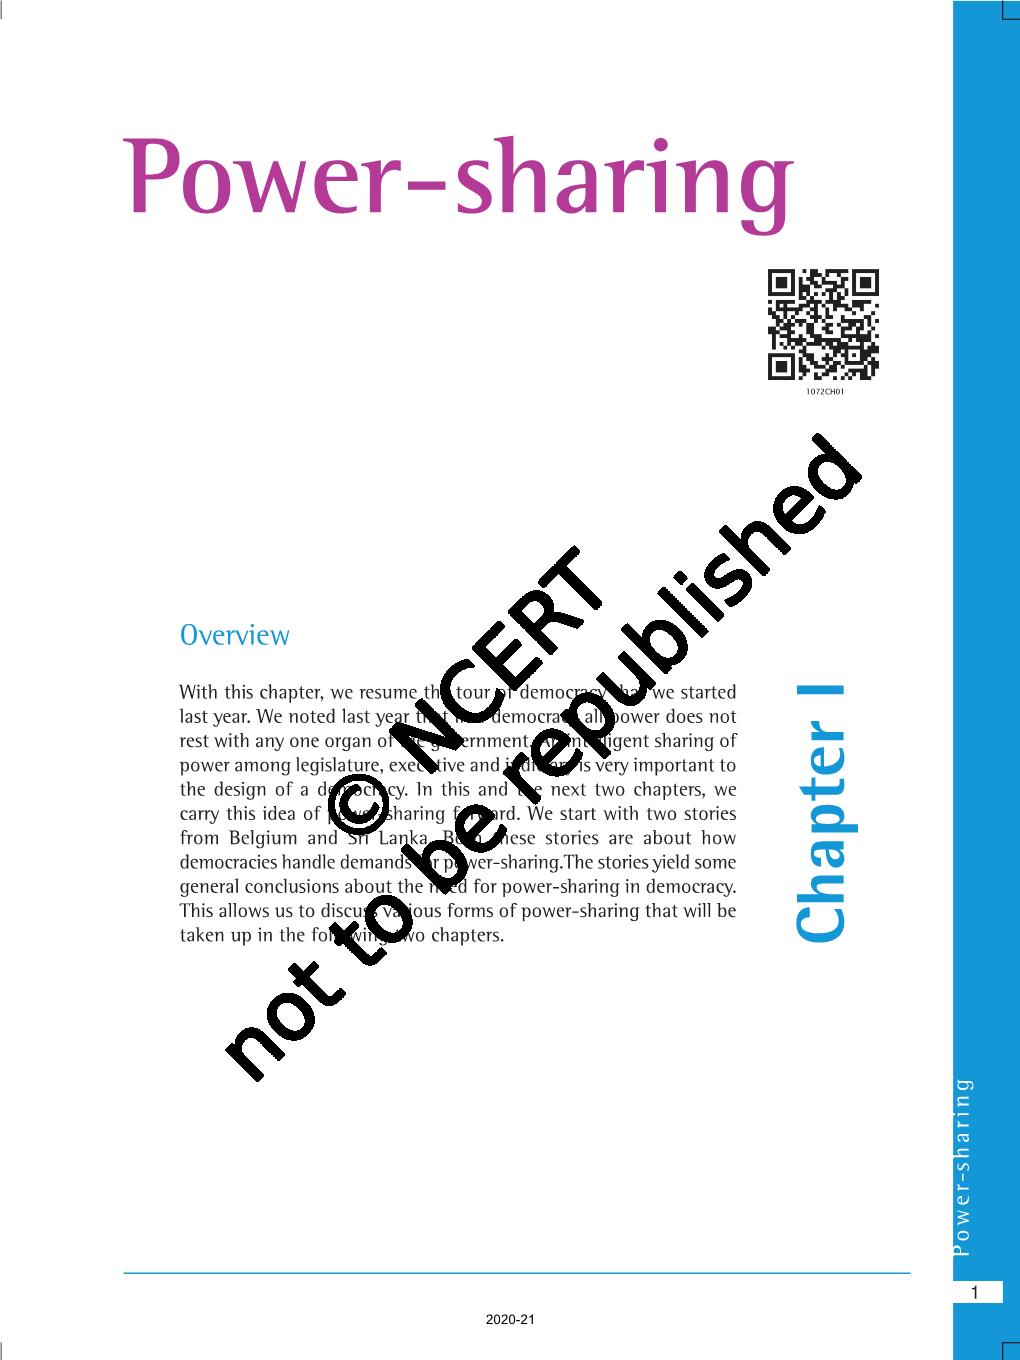 Power Sharing Is Good for © Democracies